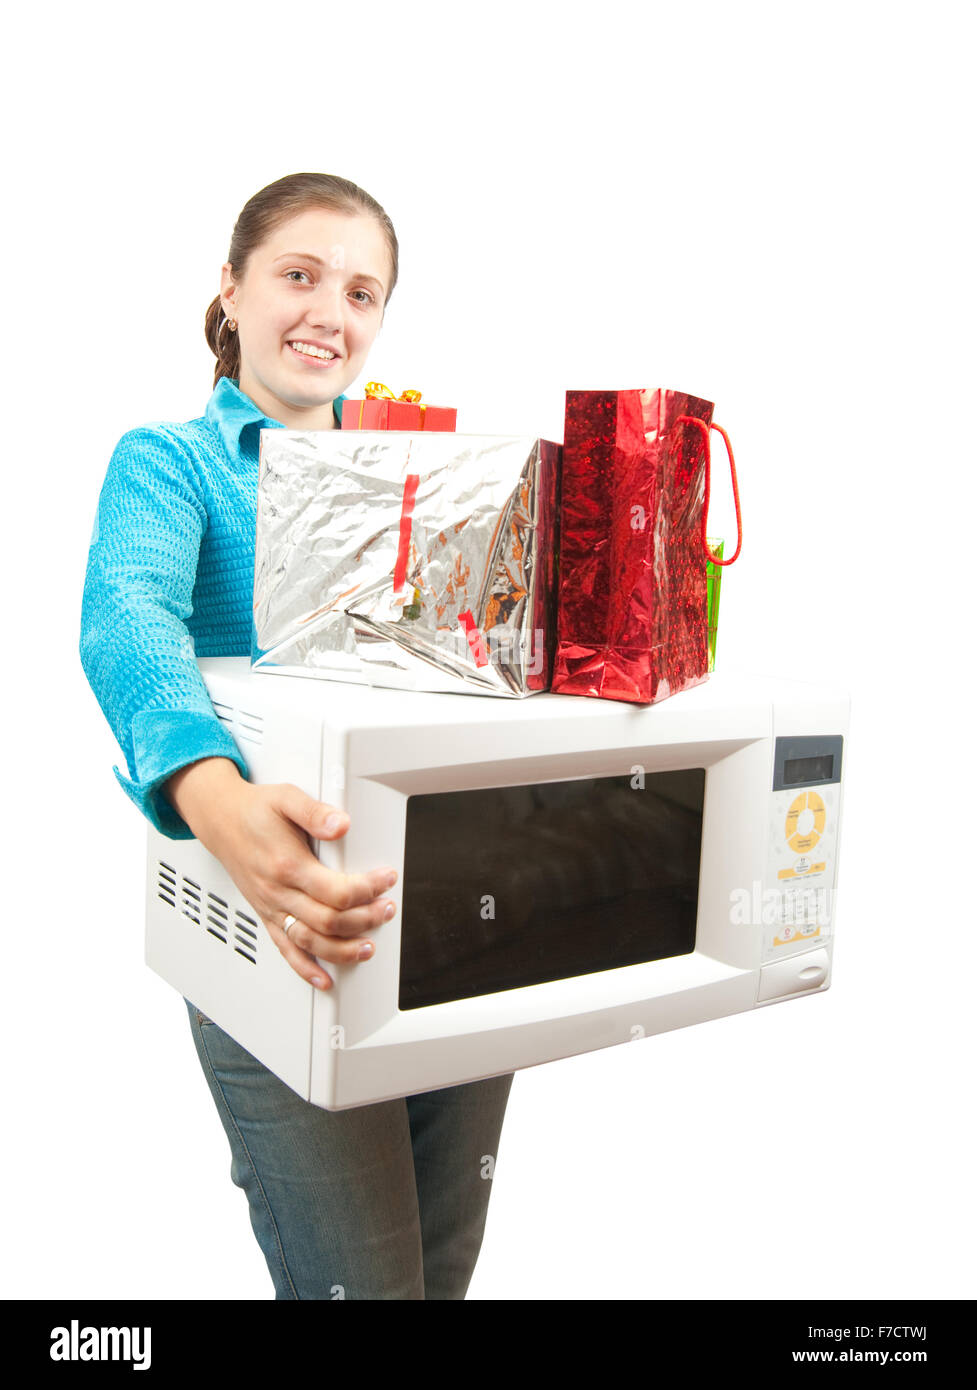 Girl with microwave oven and present boxes. Isolated over white Stock Photo